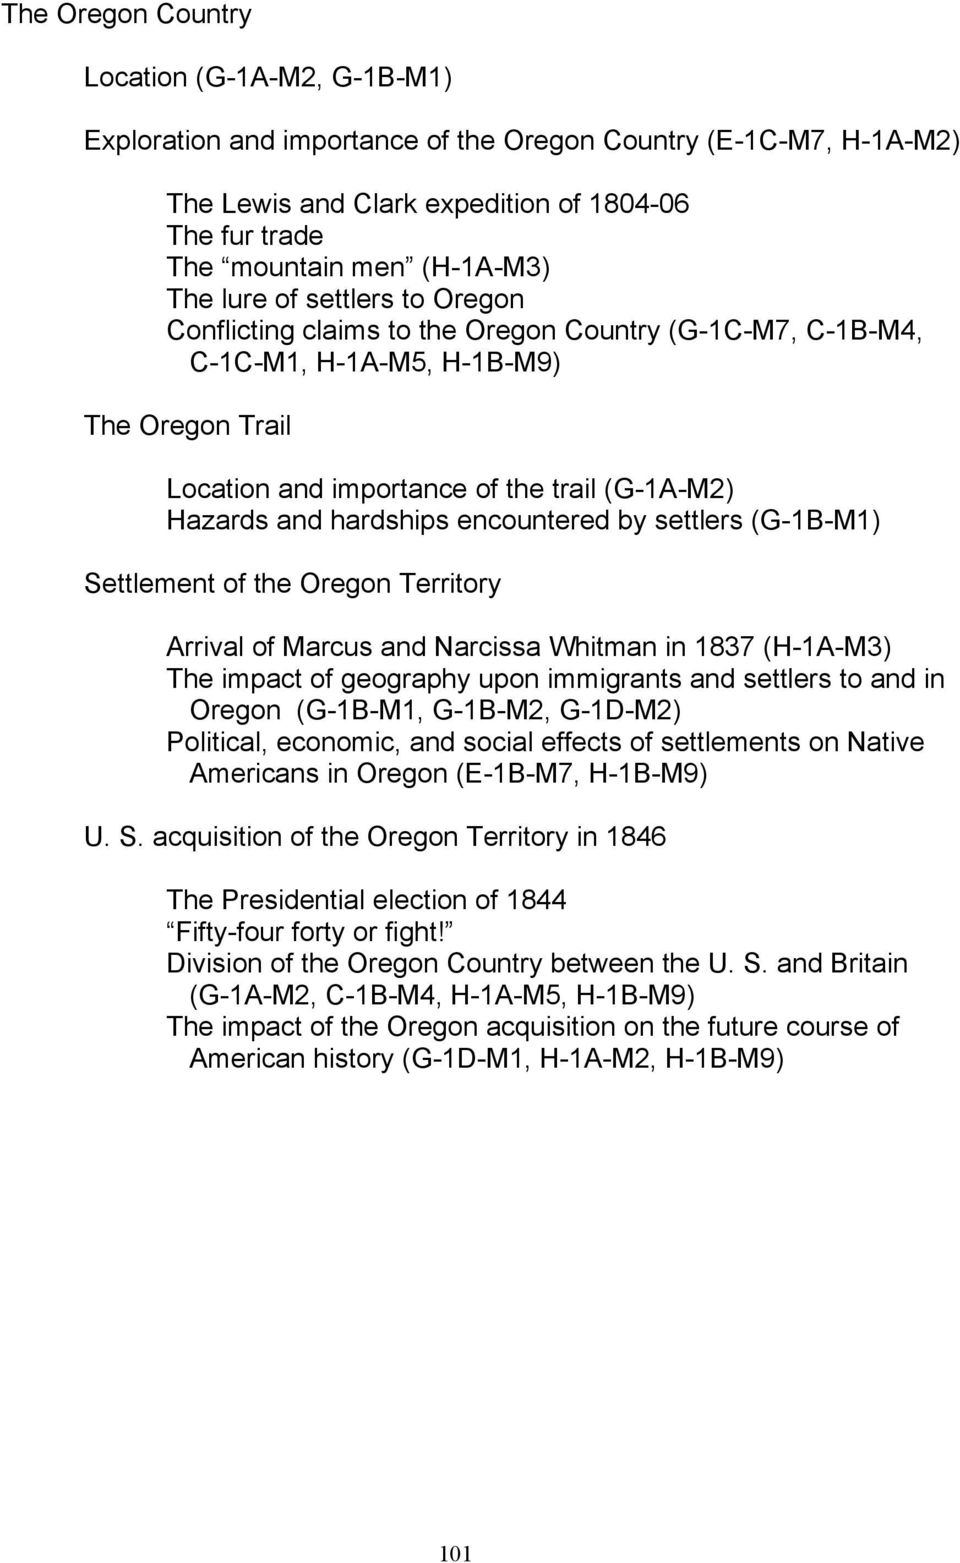 hardships encountered by settlers (G-1B-M1) Settlement of the Oregon Territory Arrival of Marcus and Narcissa Whitman in 1837 (H-1A-M3) The impact of geography upon immigrants and settlers to and in